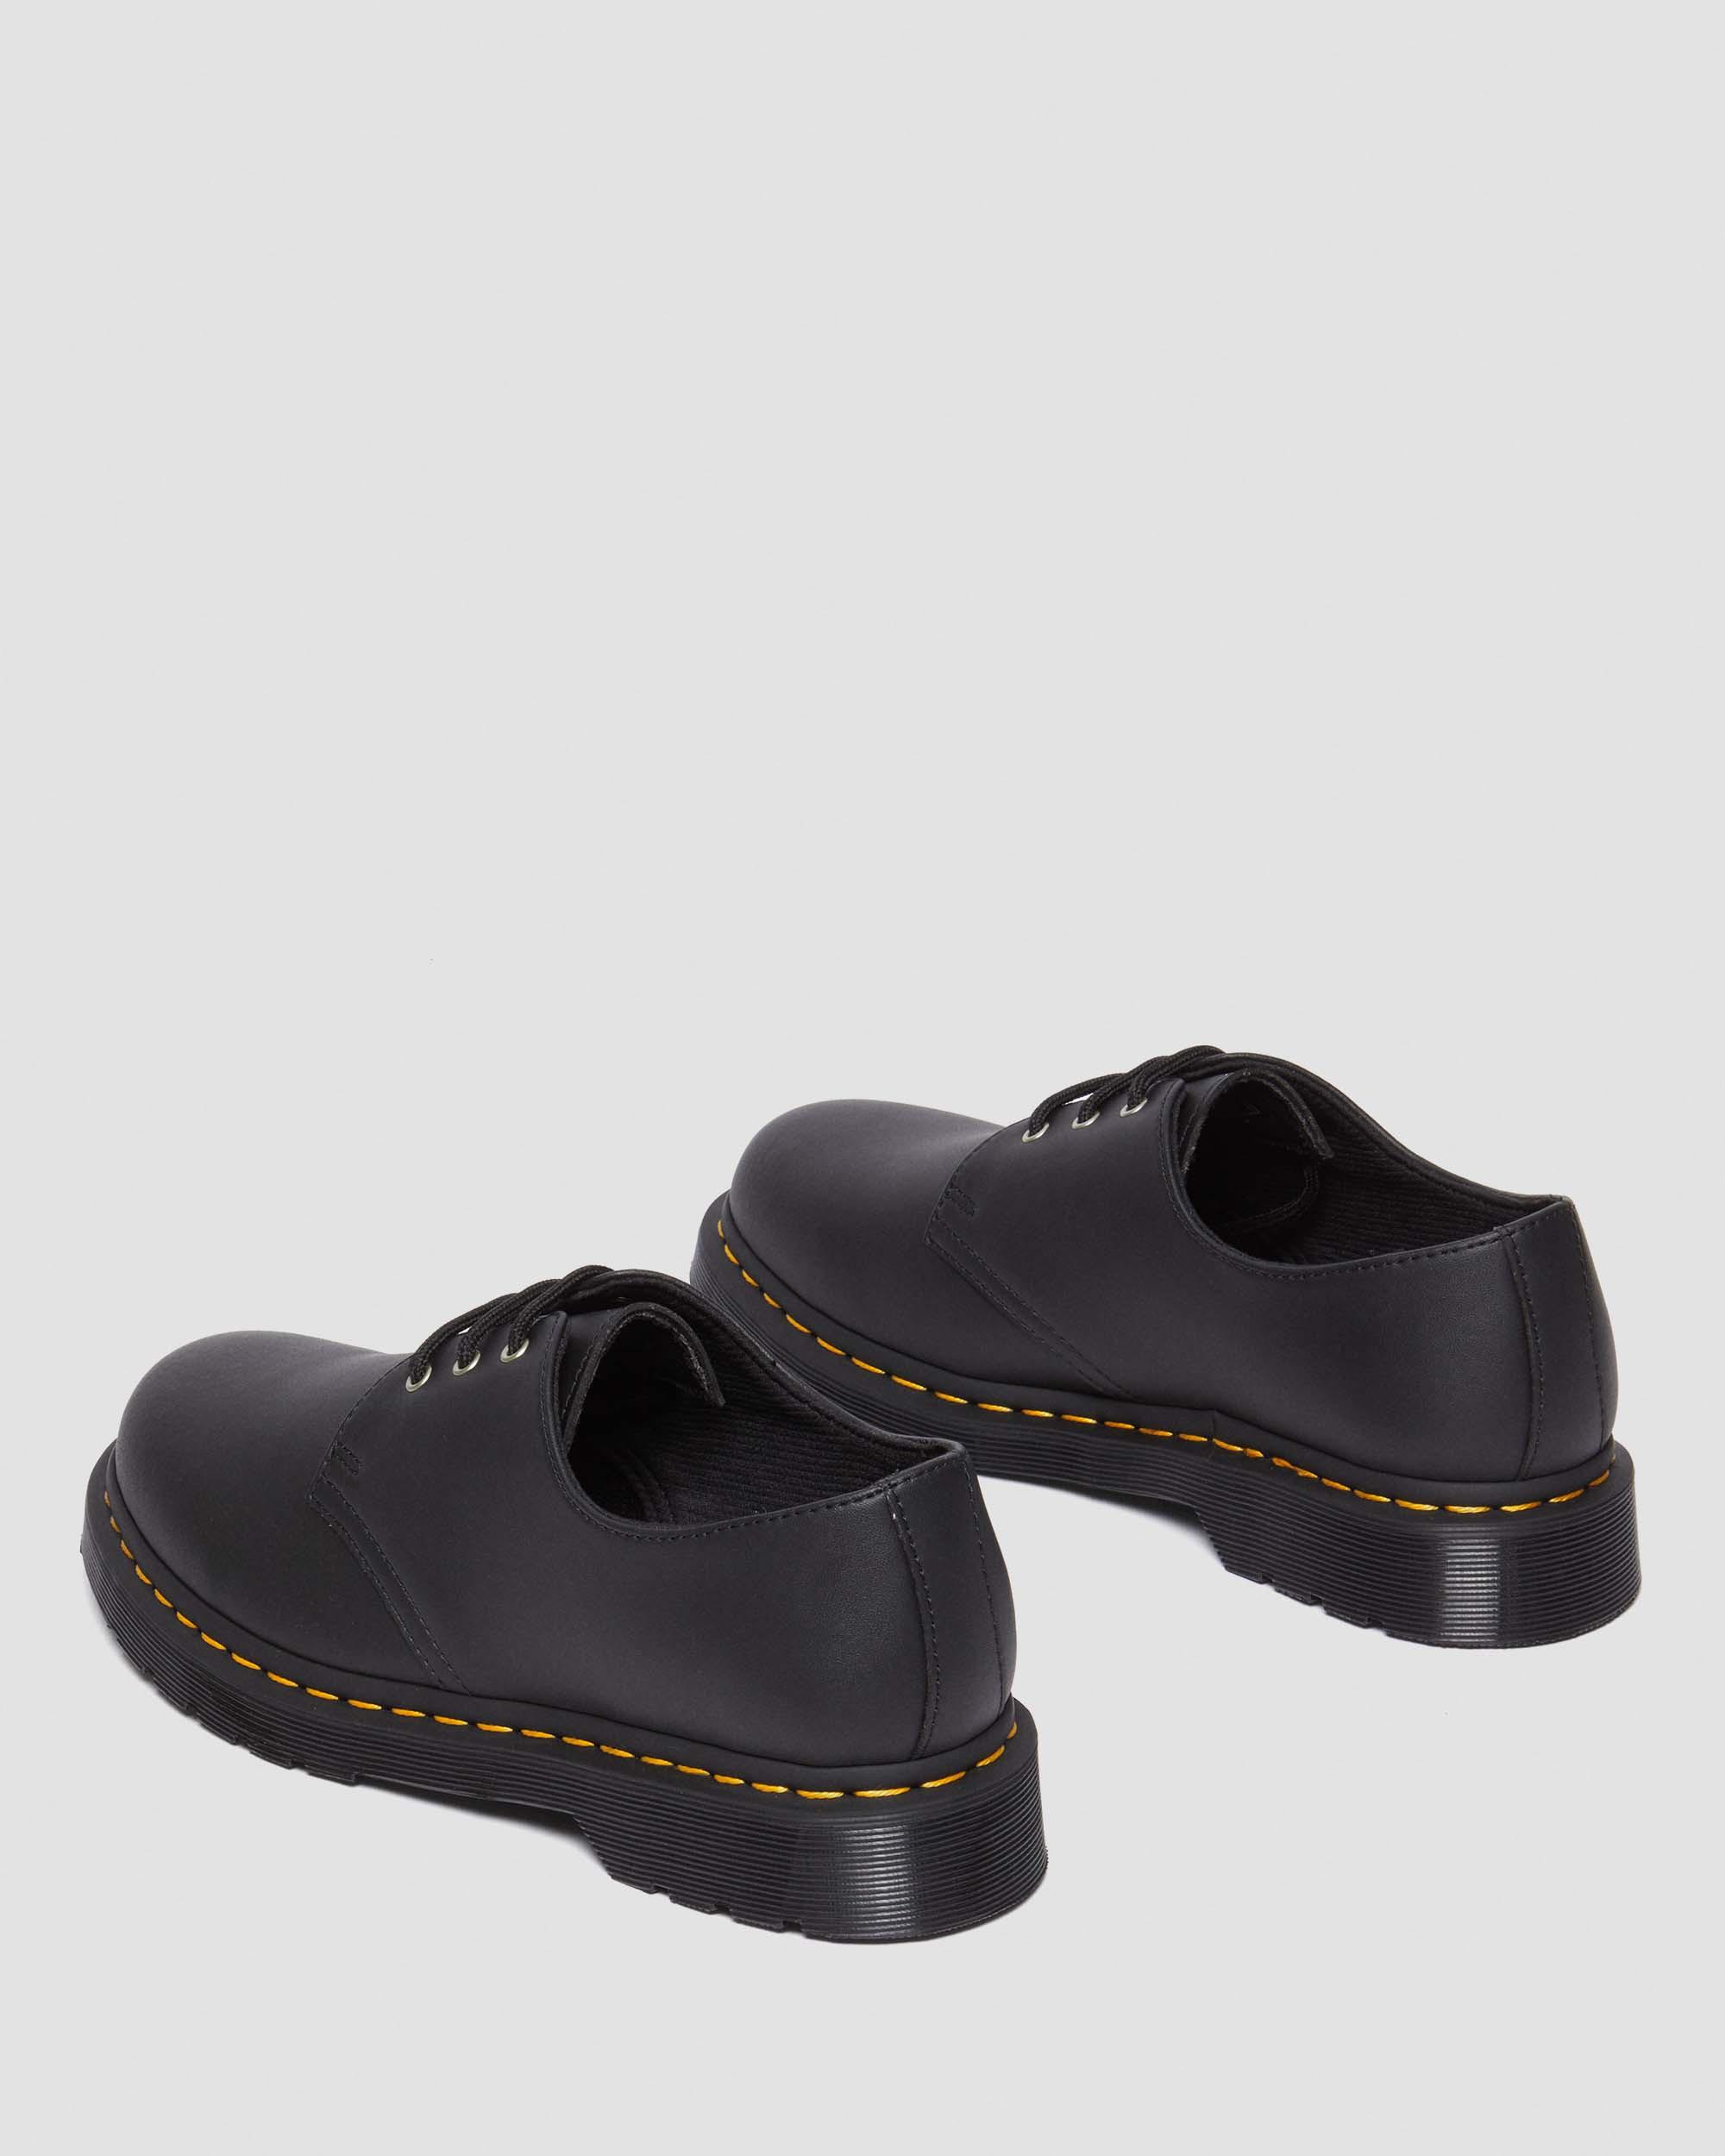 1461 Genix Nappa Reclaimed Leather Oxford Shoes in Black